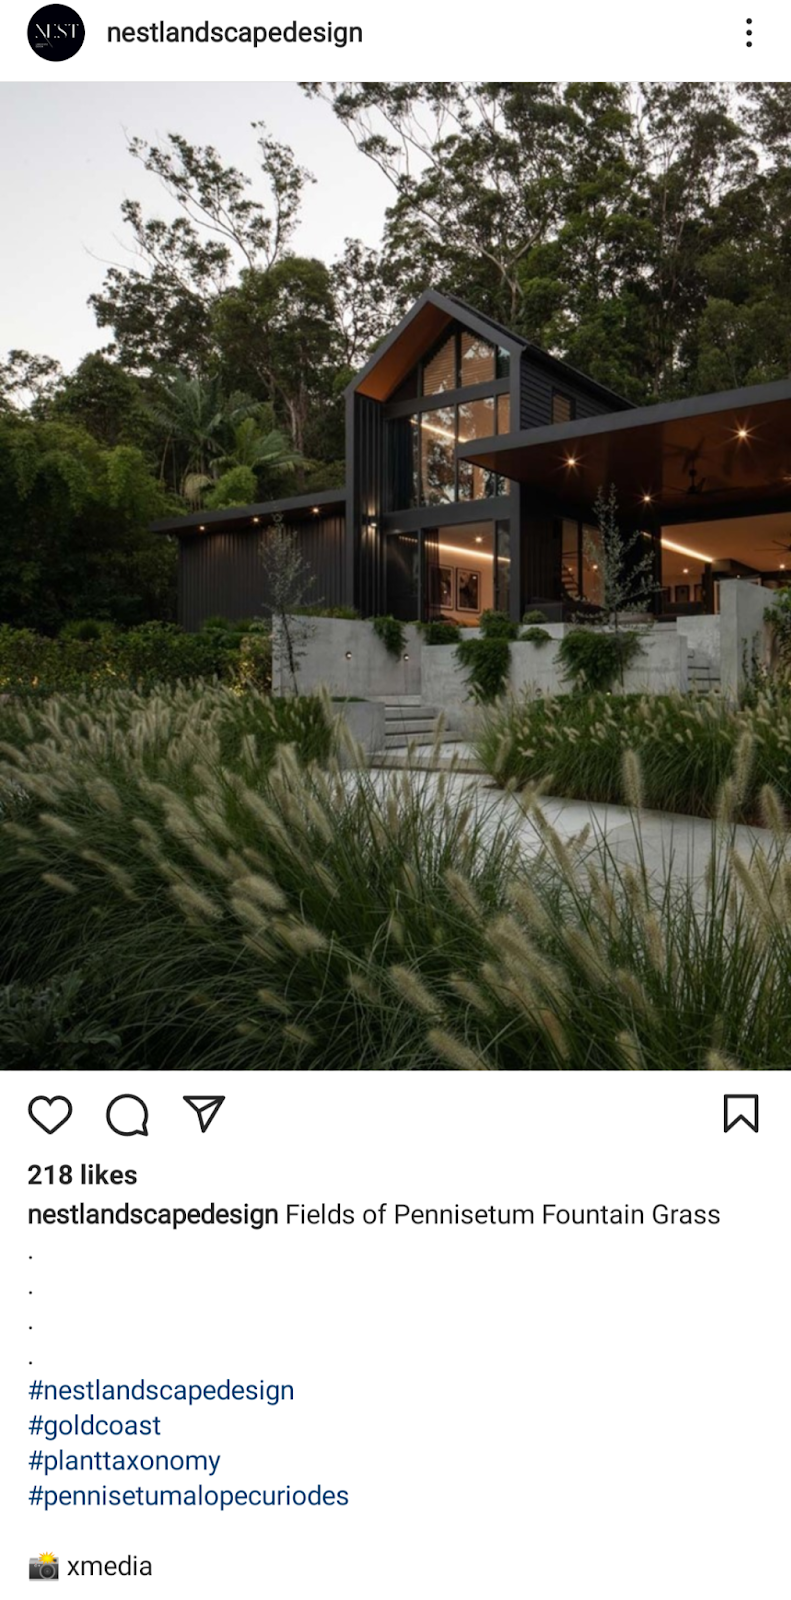 Landscape Design Firm Instagram Post Example with Hashtags